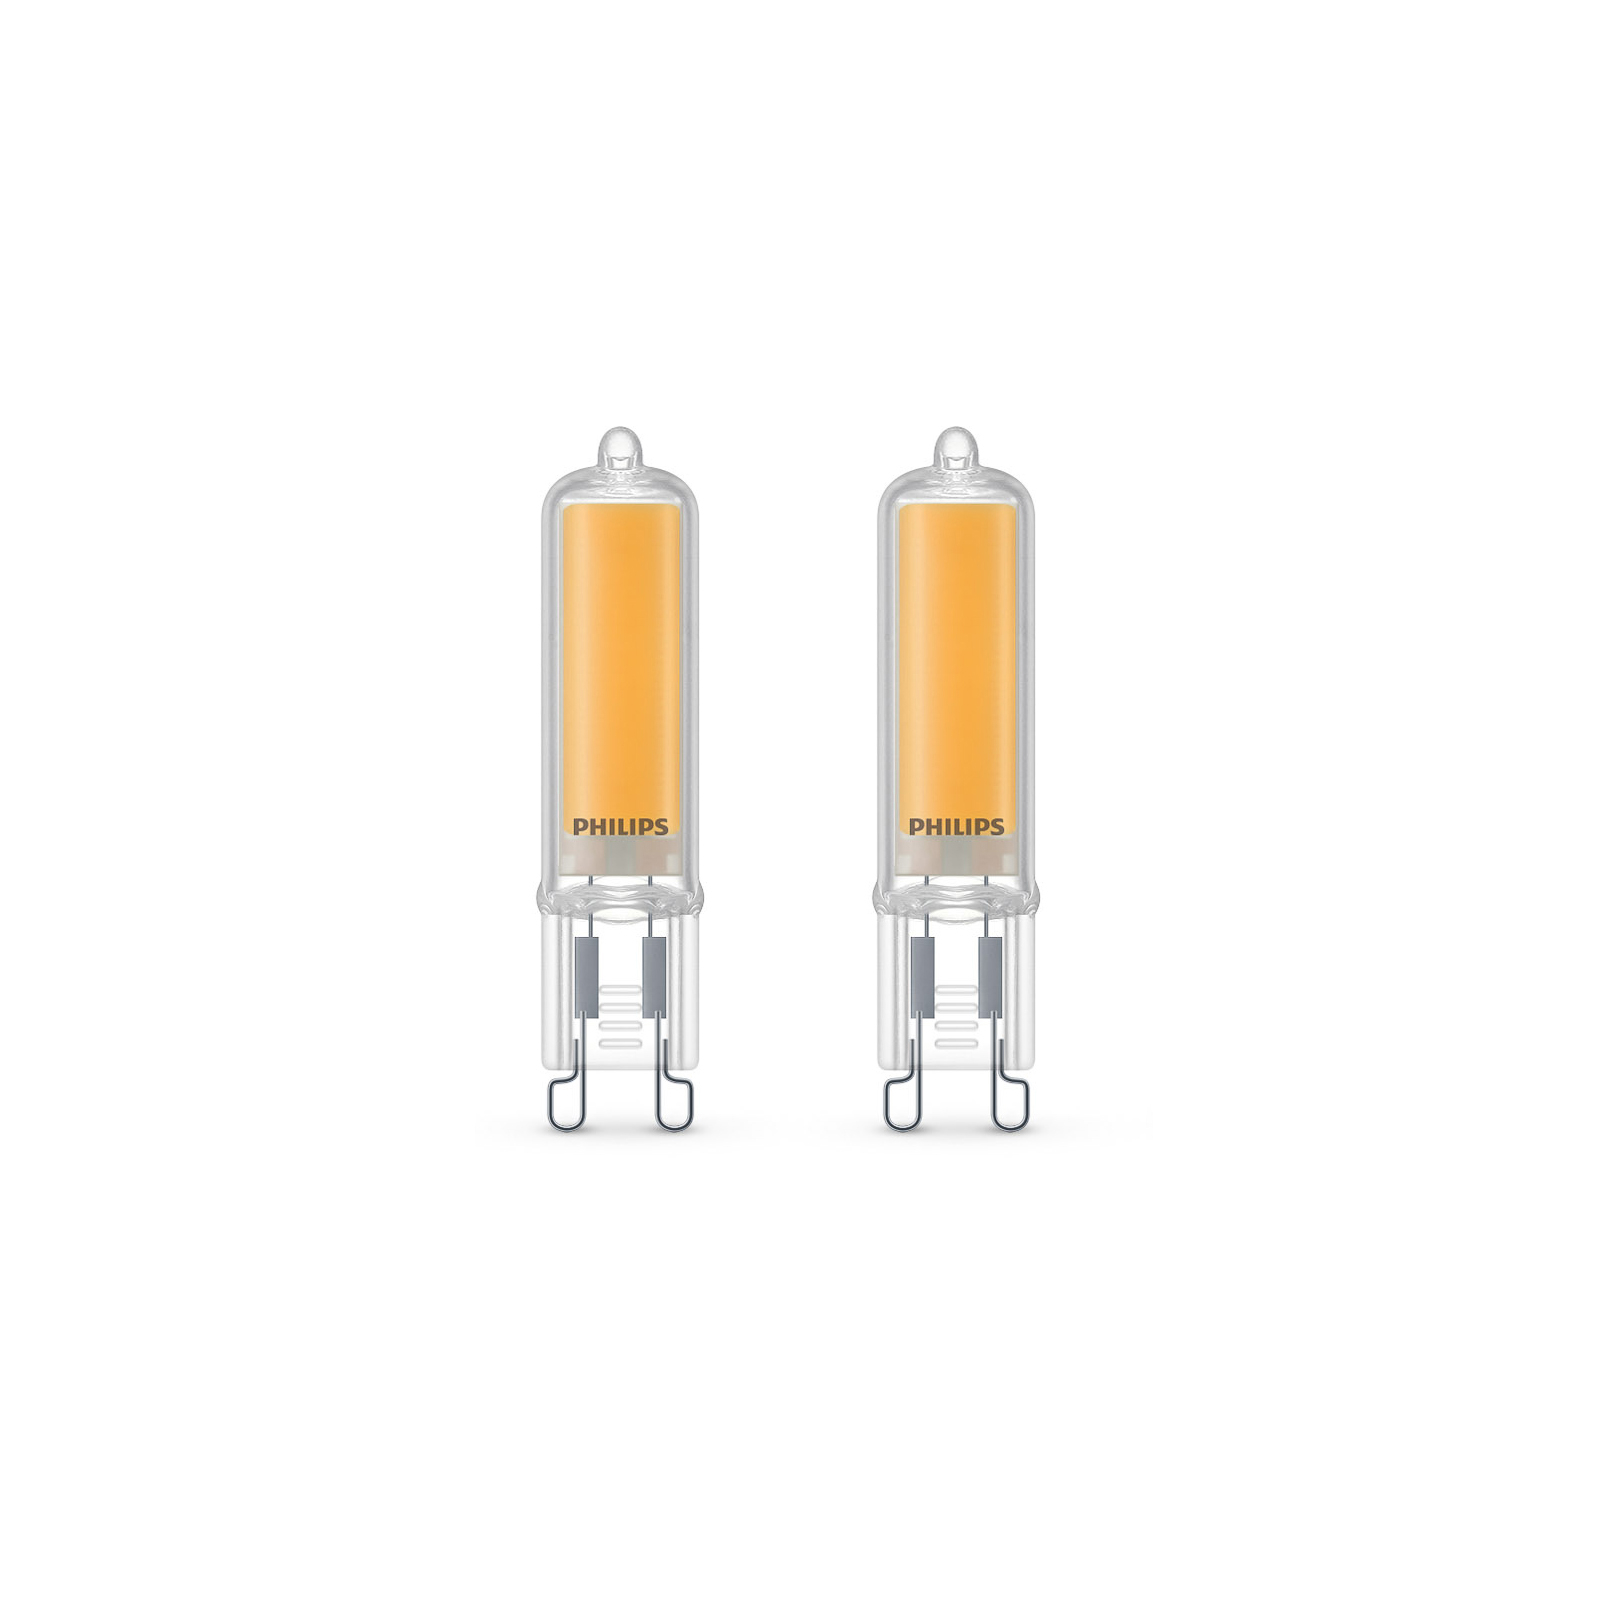 Philips 2 ampoules broche LED G9 3,5W 2700K